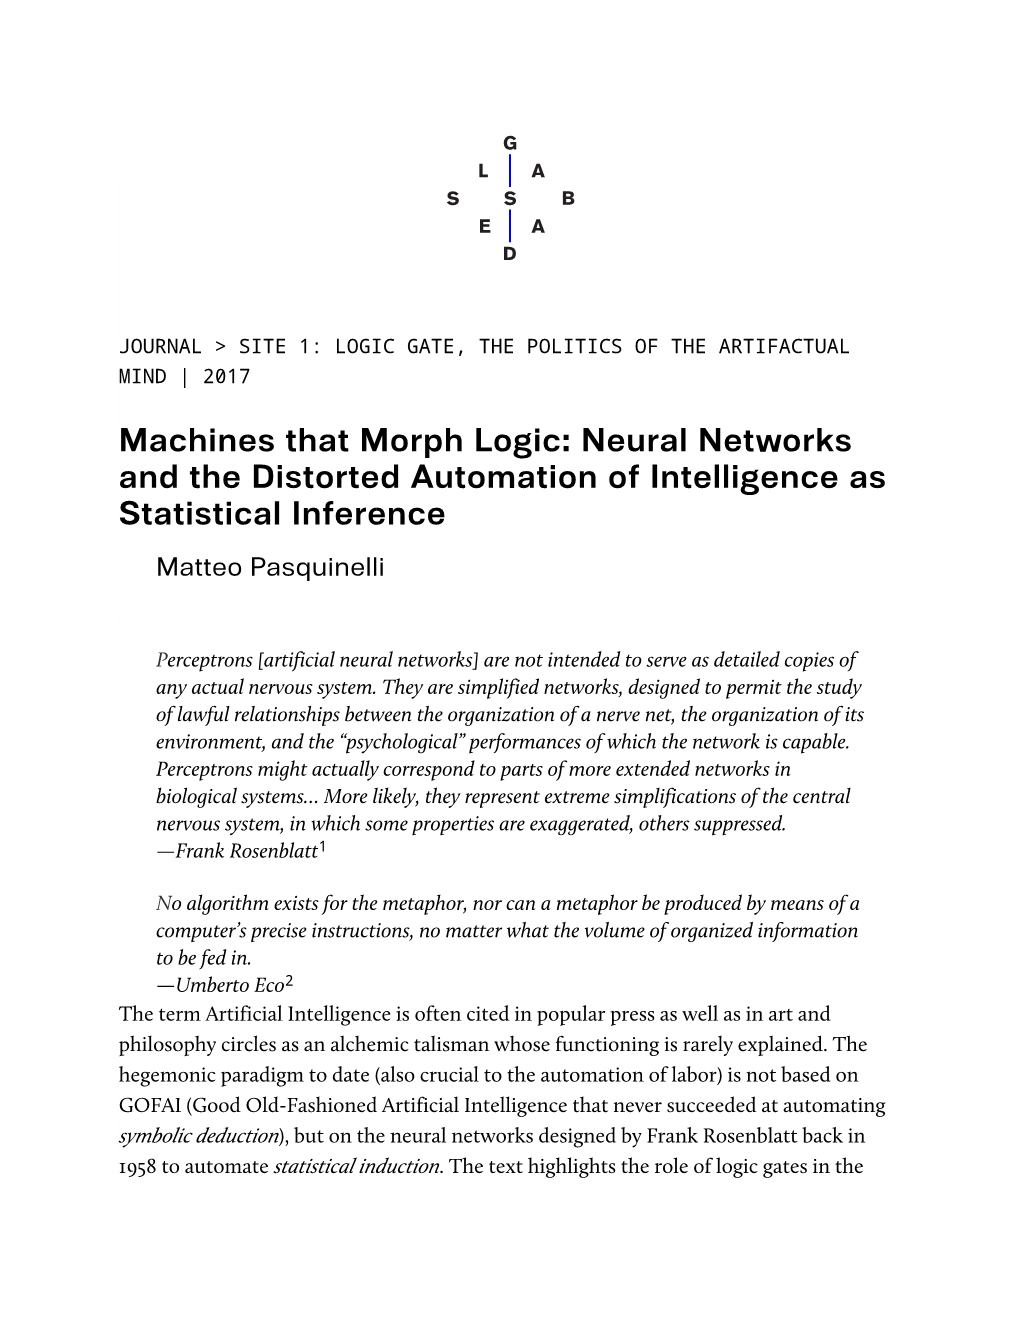 Neural Networks and the Distorted Automation of Intelligence As Statistical Inference Matteo Pasquinelli